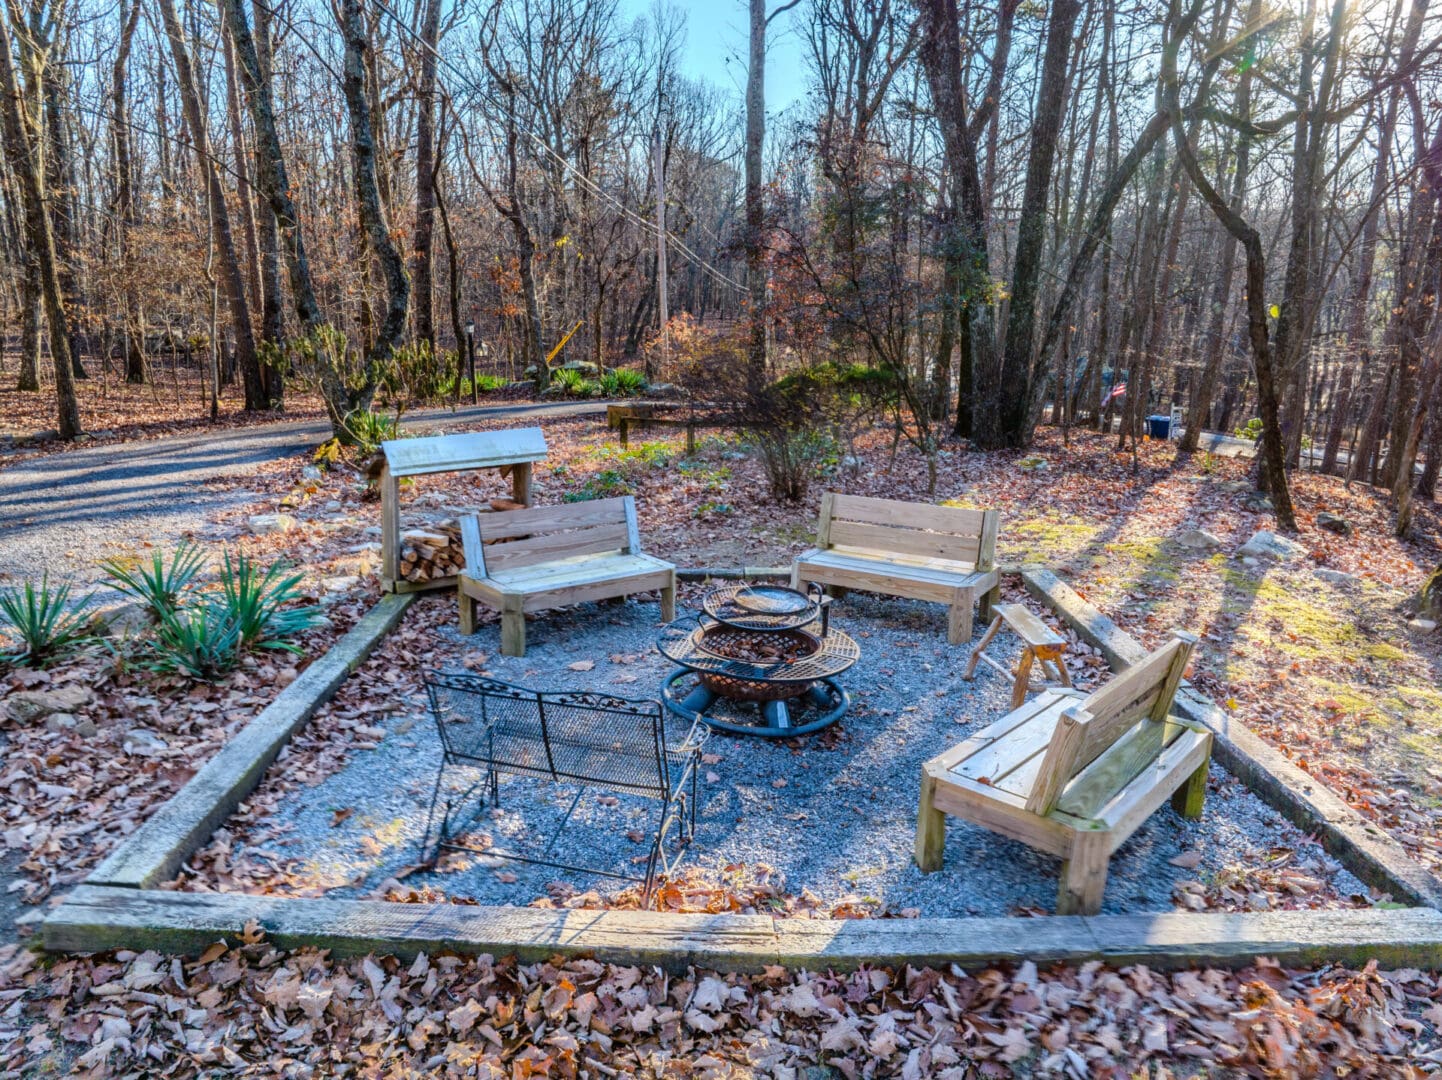 A vacation spot featuring a fire pit nestled amidst trees and wood benches.